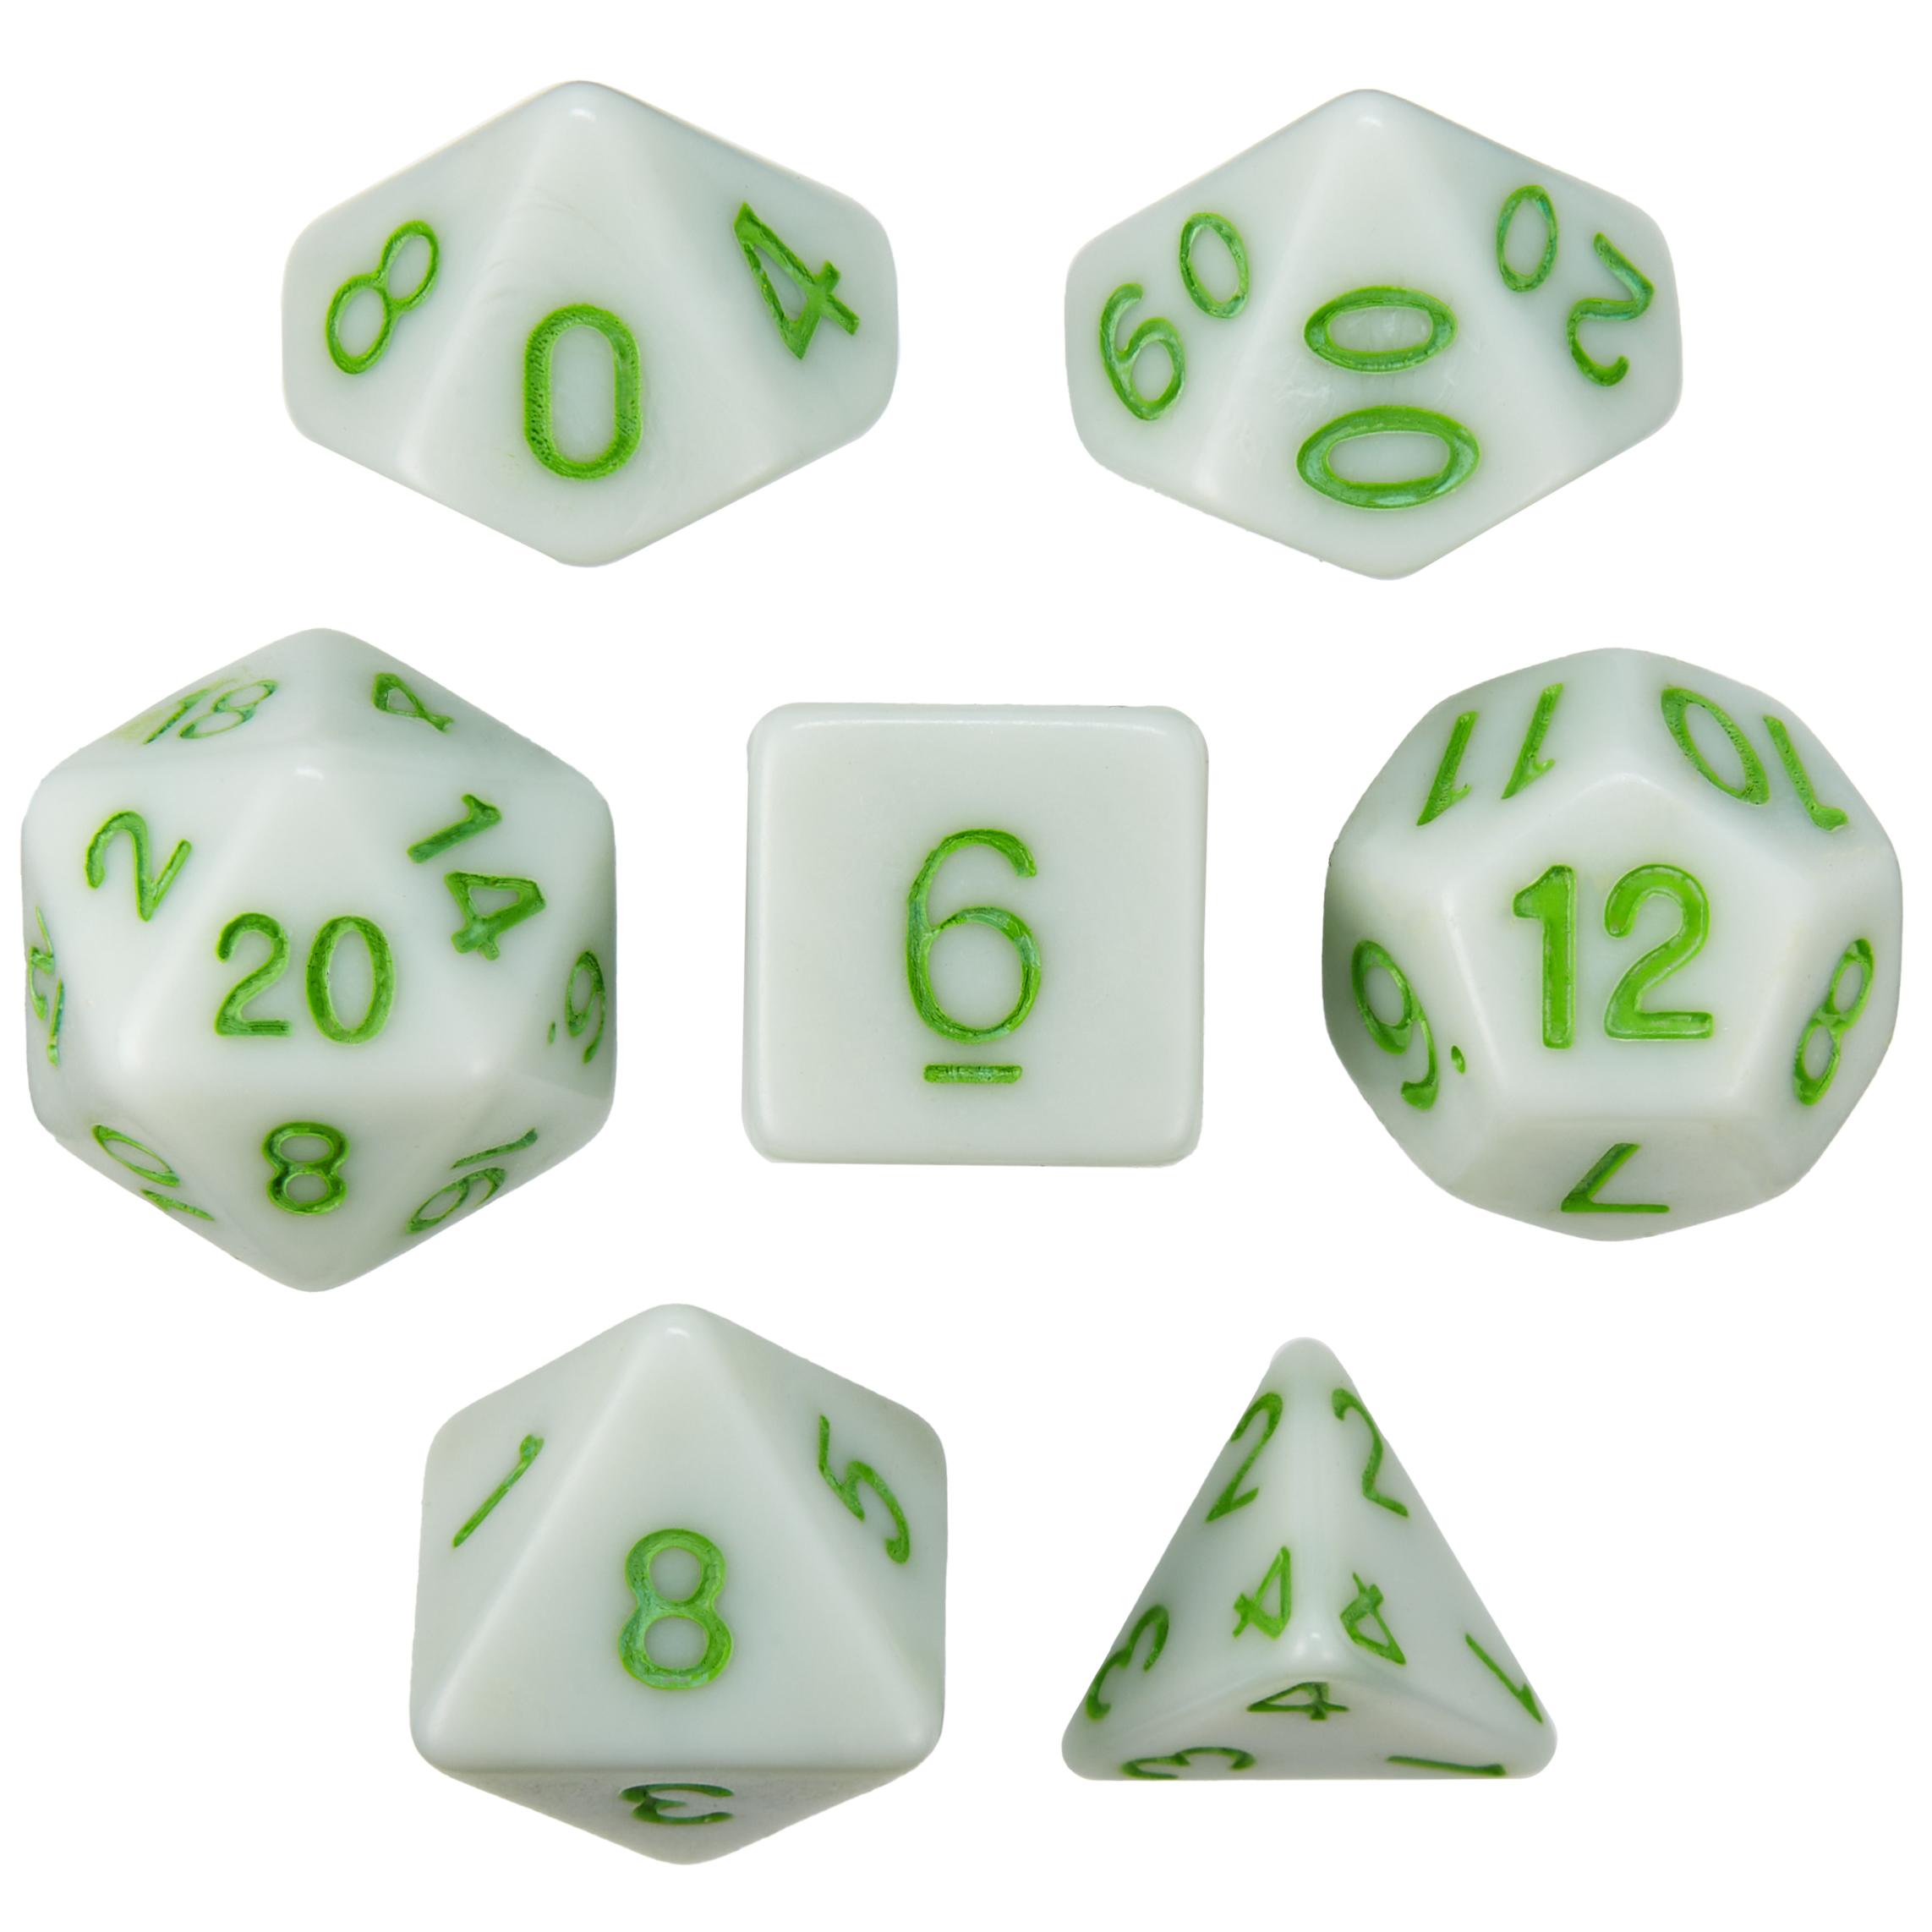 Set of 7 Dice - Grave Moss - Solid Green with Green Paint